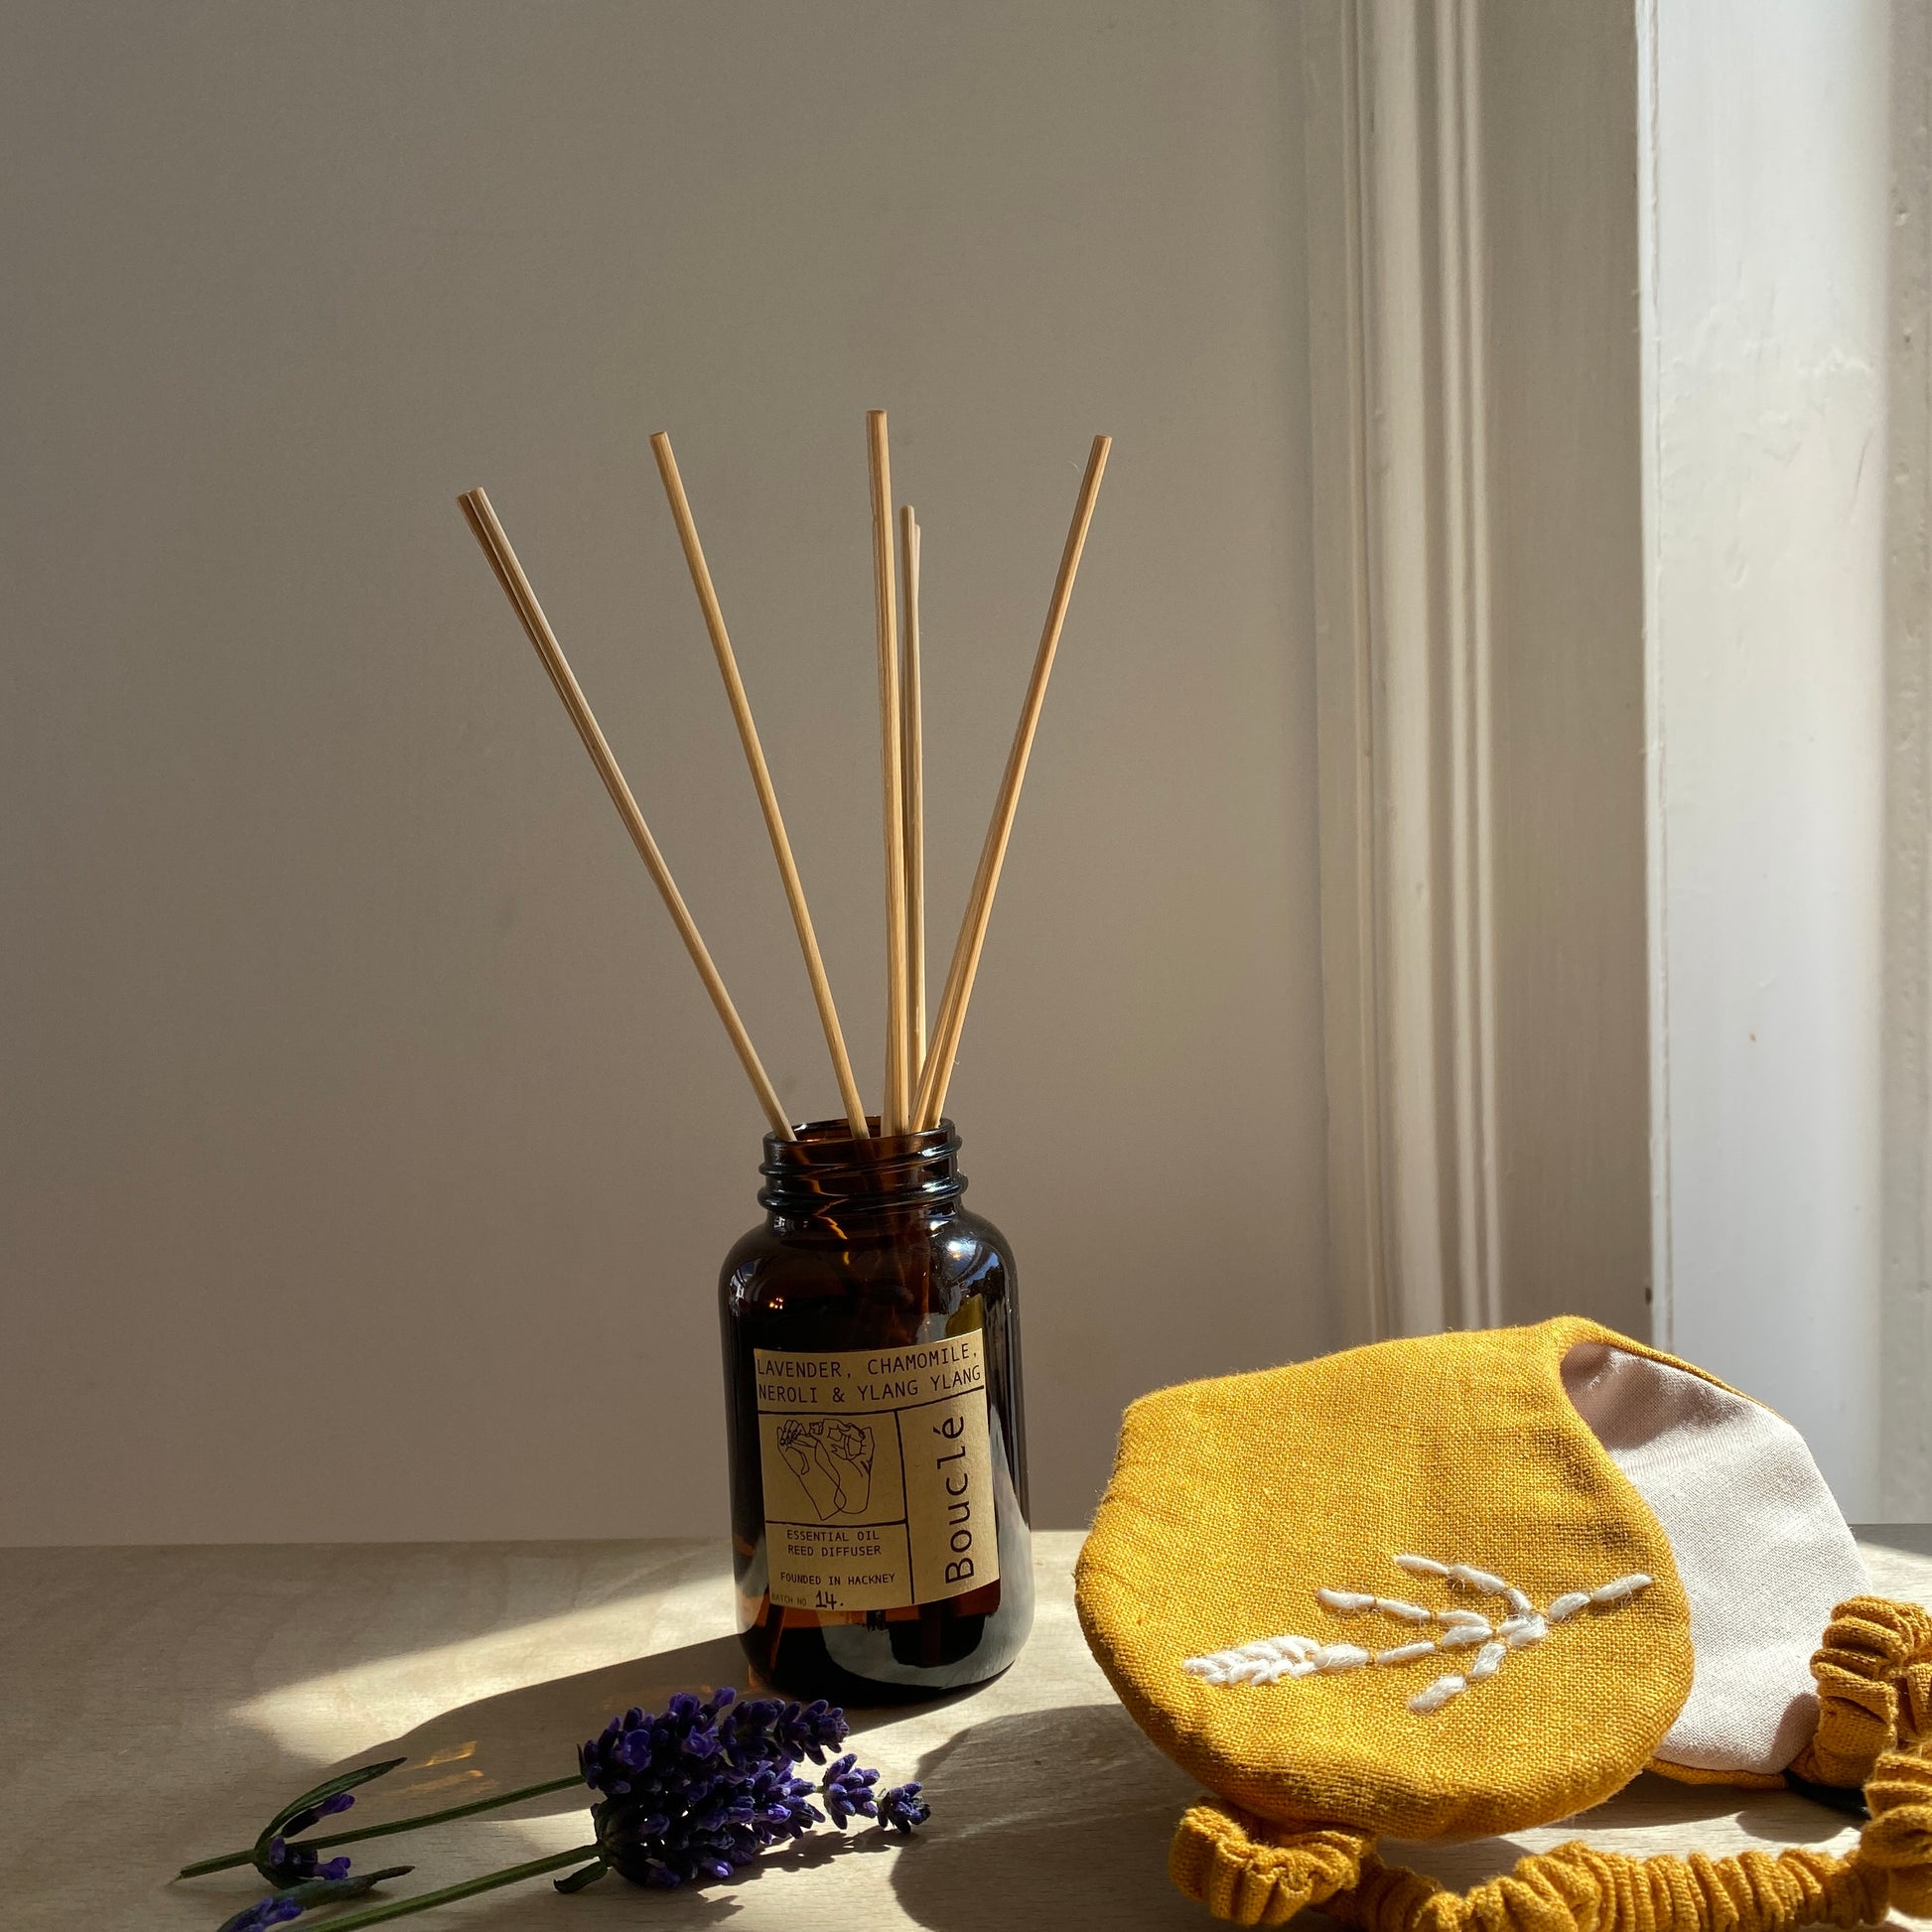 Lavender, Chamomile, Neroli & Ylang Ylang essential oil rattan reed diffuser made in East London